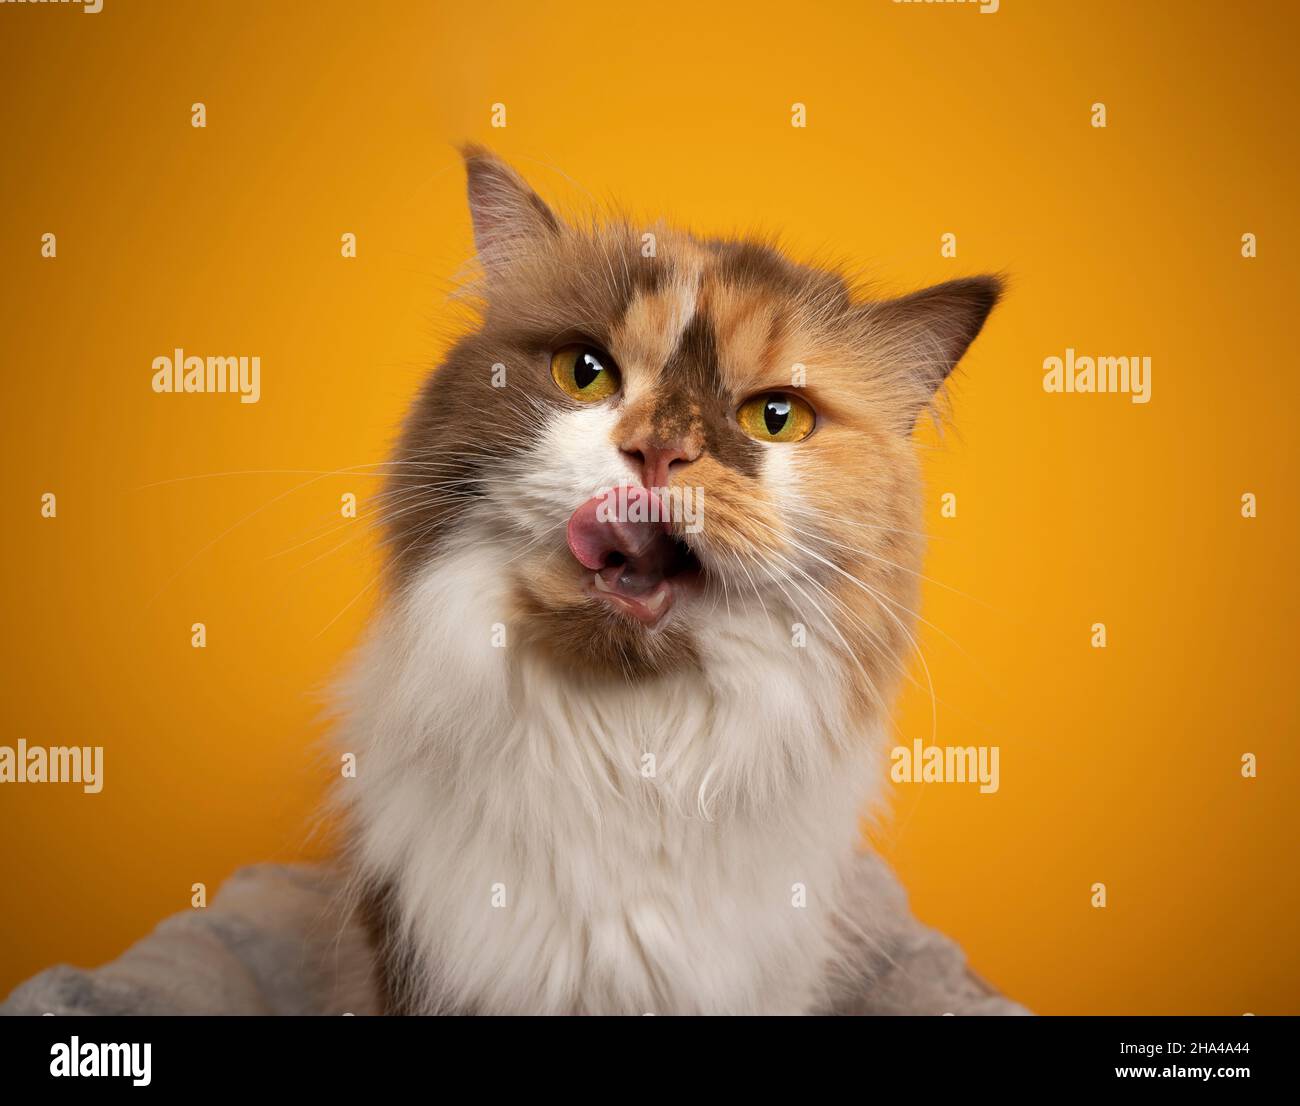 hungry calico british longhair cat licking lips looking at camera curiously portrait on yellow background Stock Photo